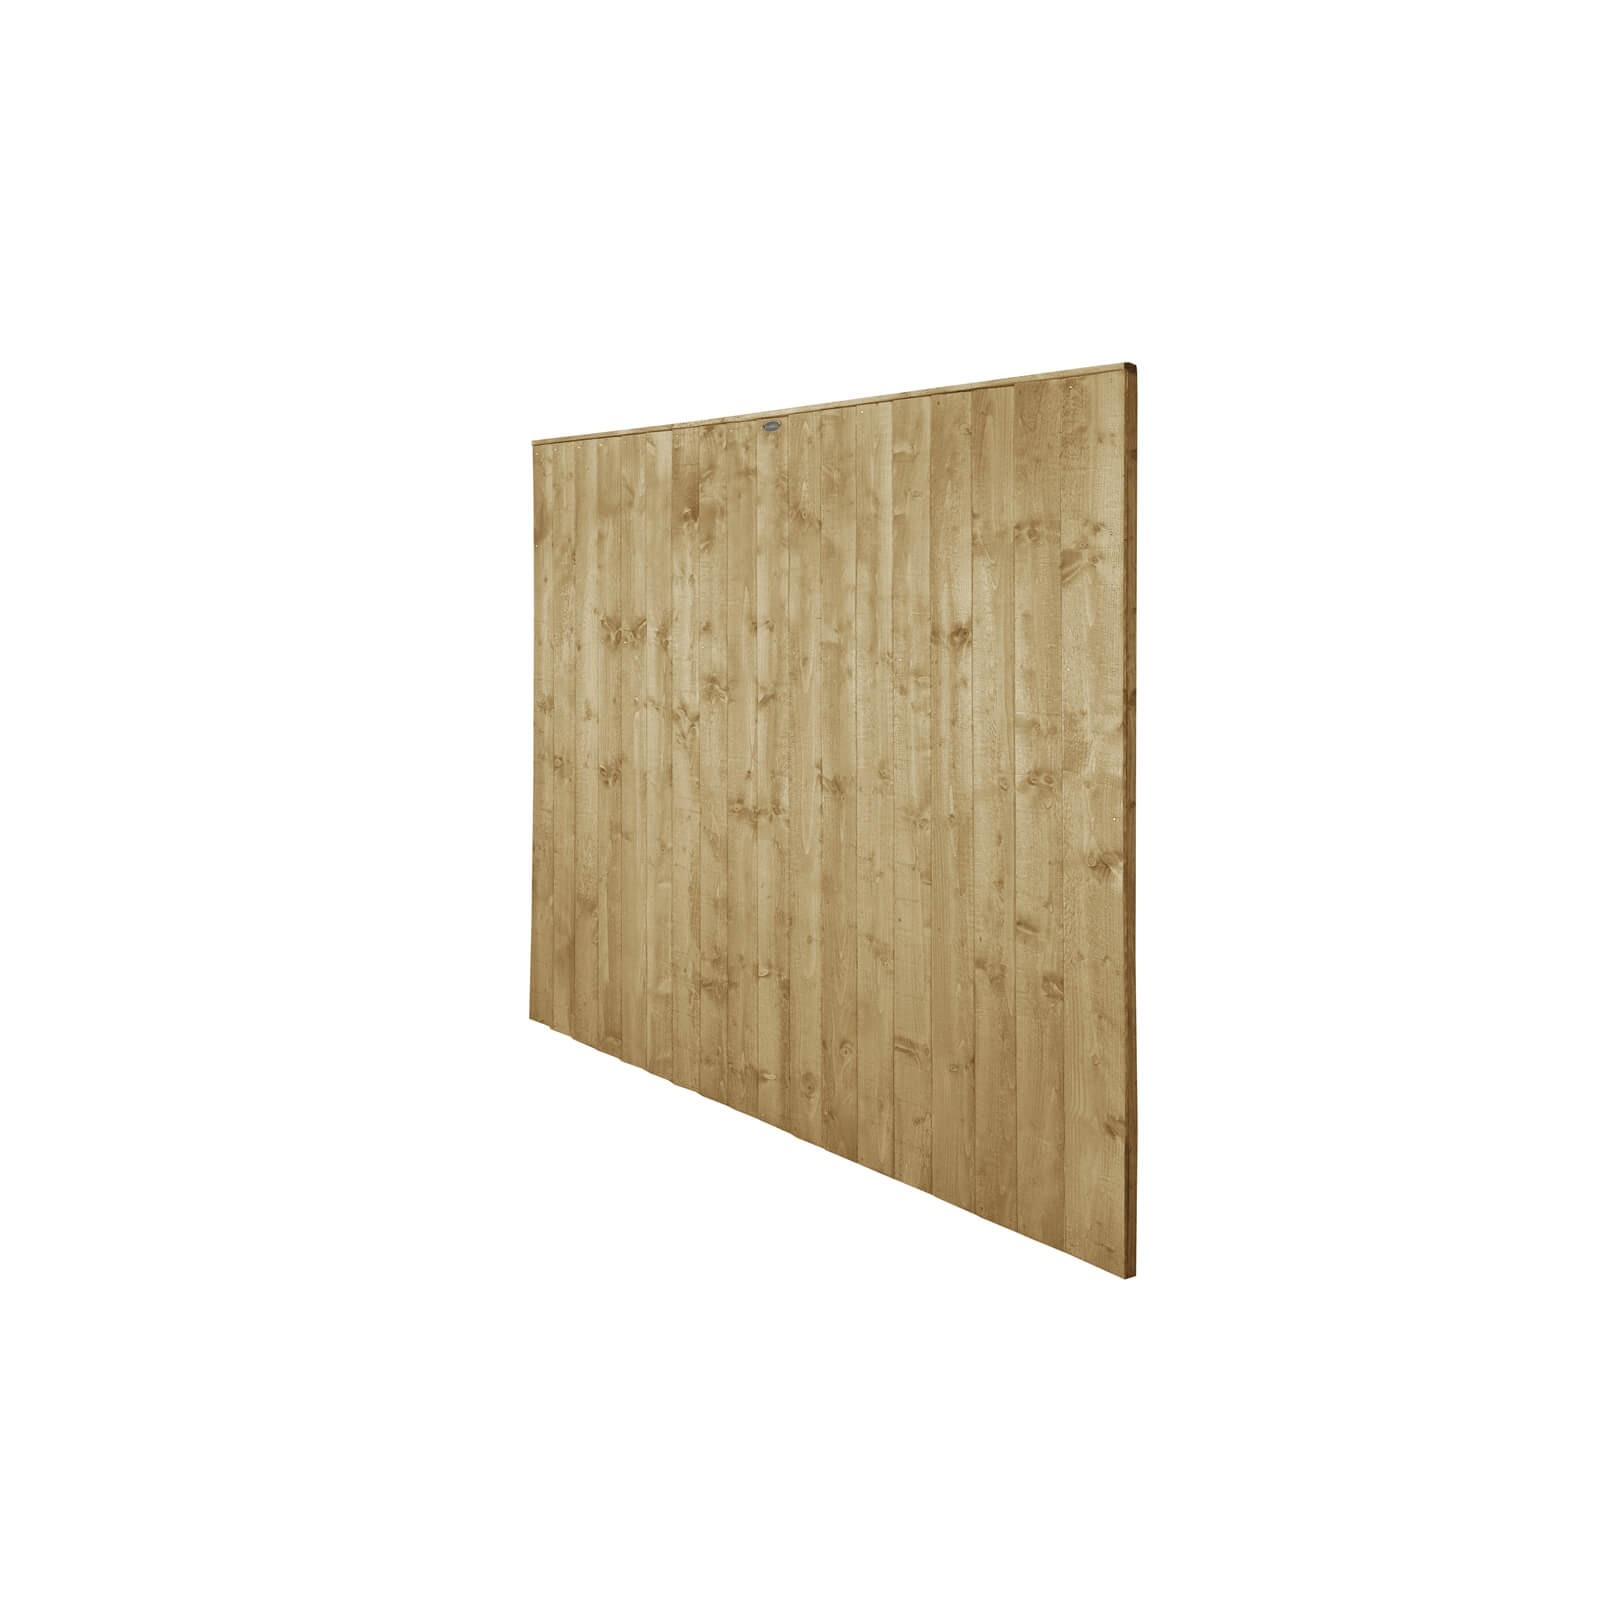 6ft x 6ft (1.83m x 1.85m) Pressure Treated Featheredge Fence Panel - Pack of 4